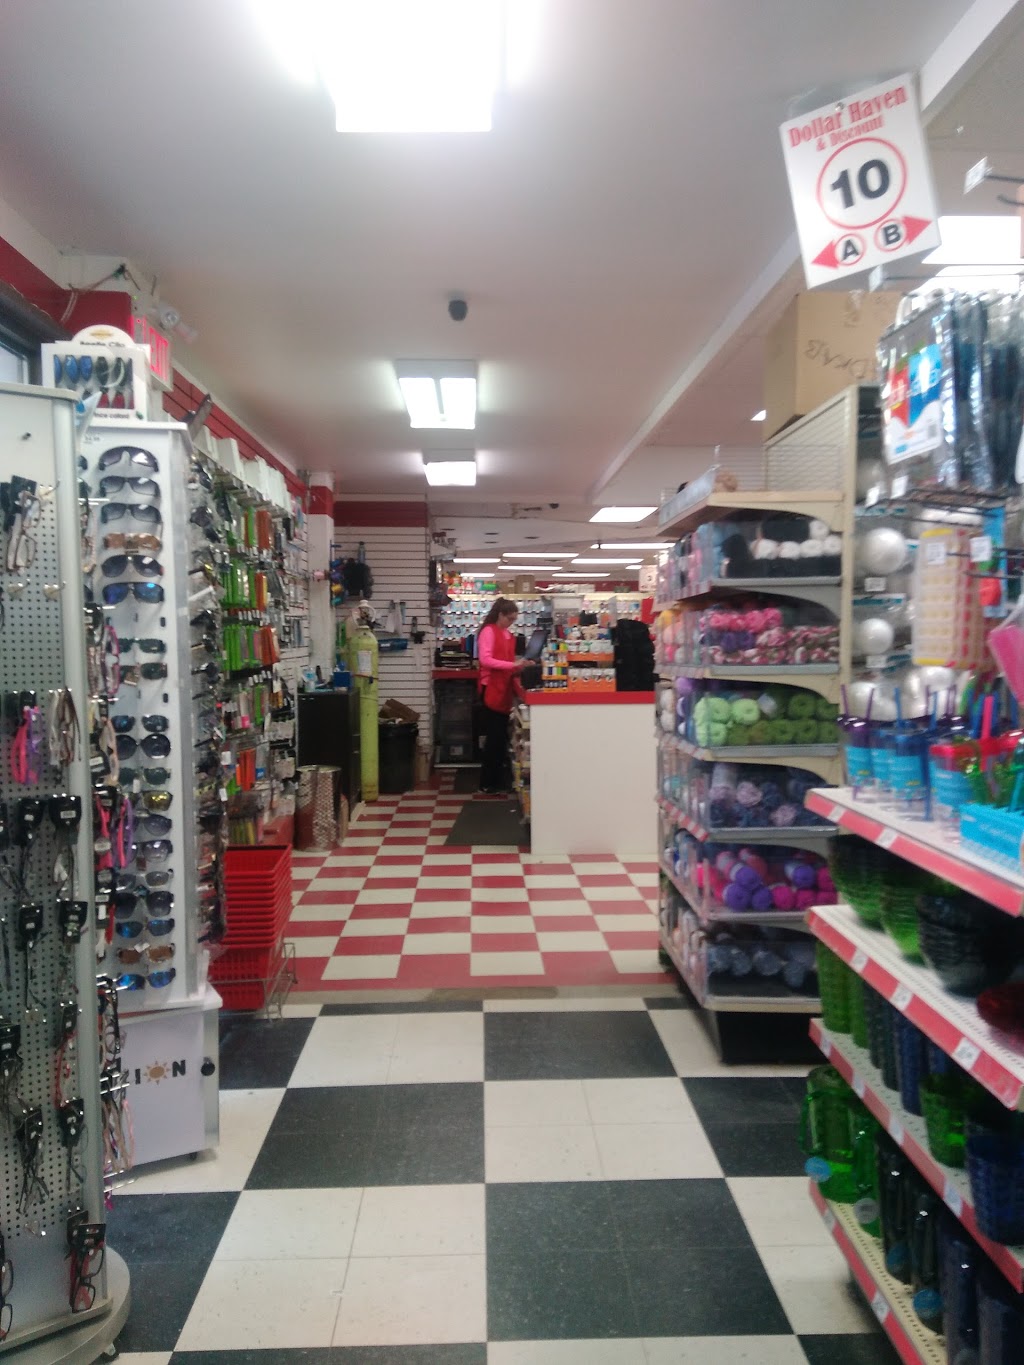 Dollar Haven & Discount | store | 385 Waterloo, New Hamburg, ON N3A 1S6, Canada | 5196626742 OR +1 519-662-6742